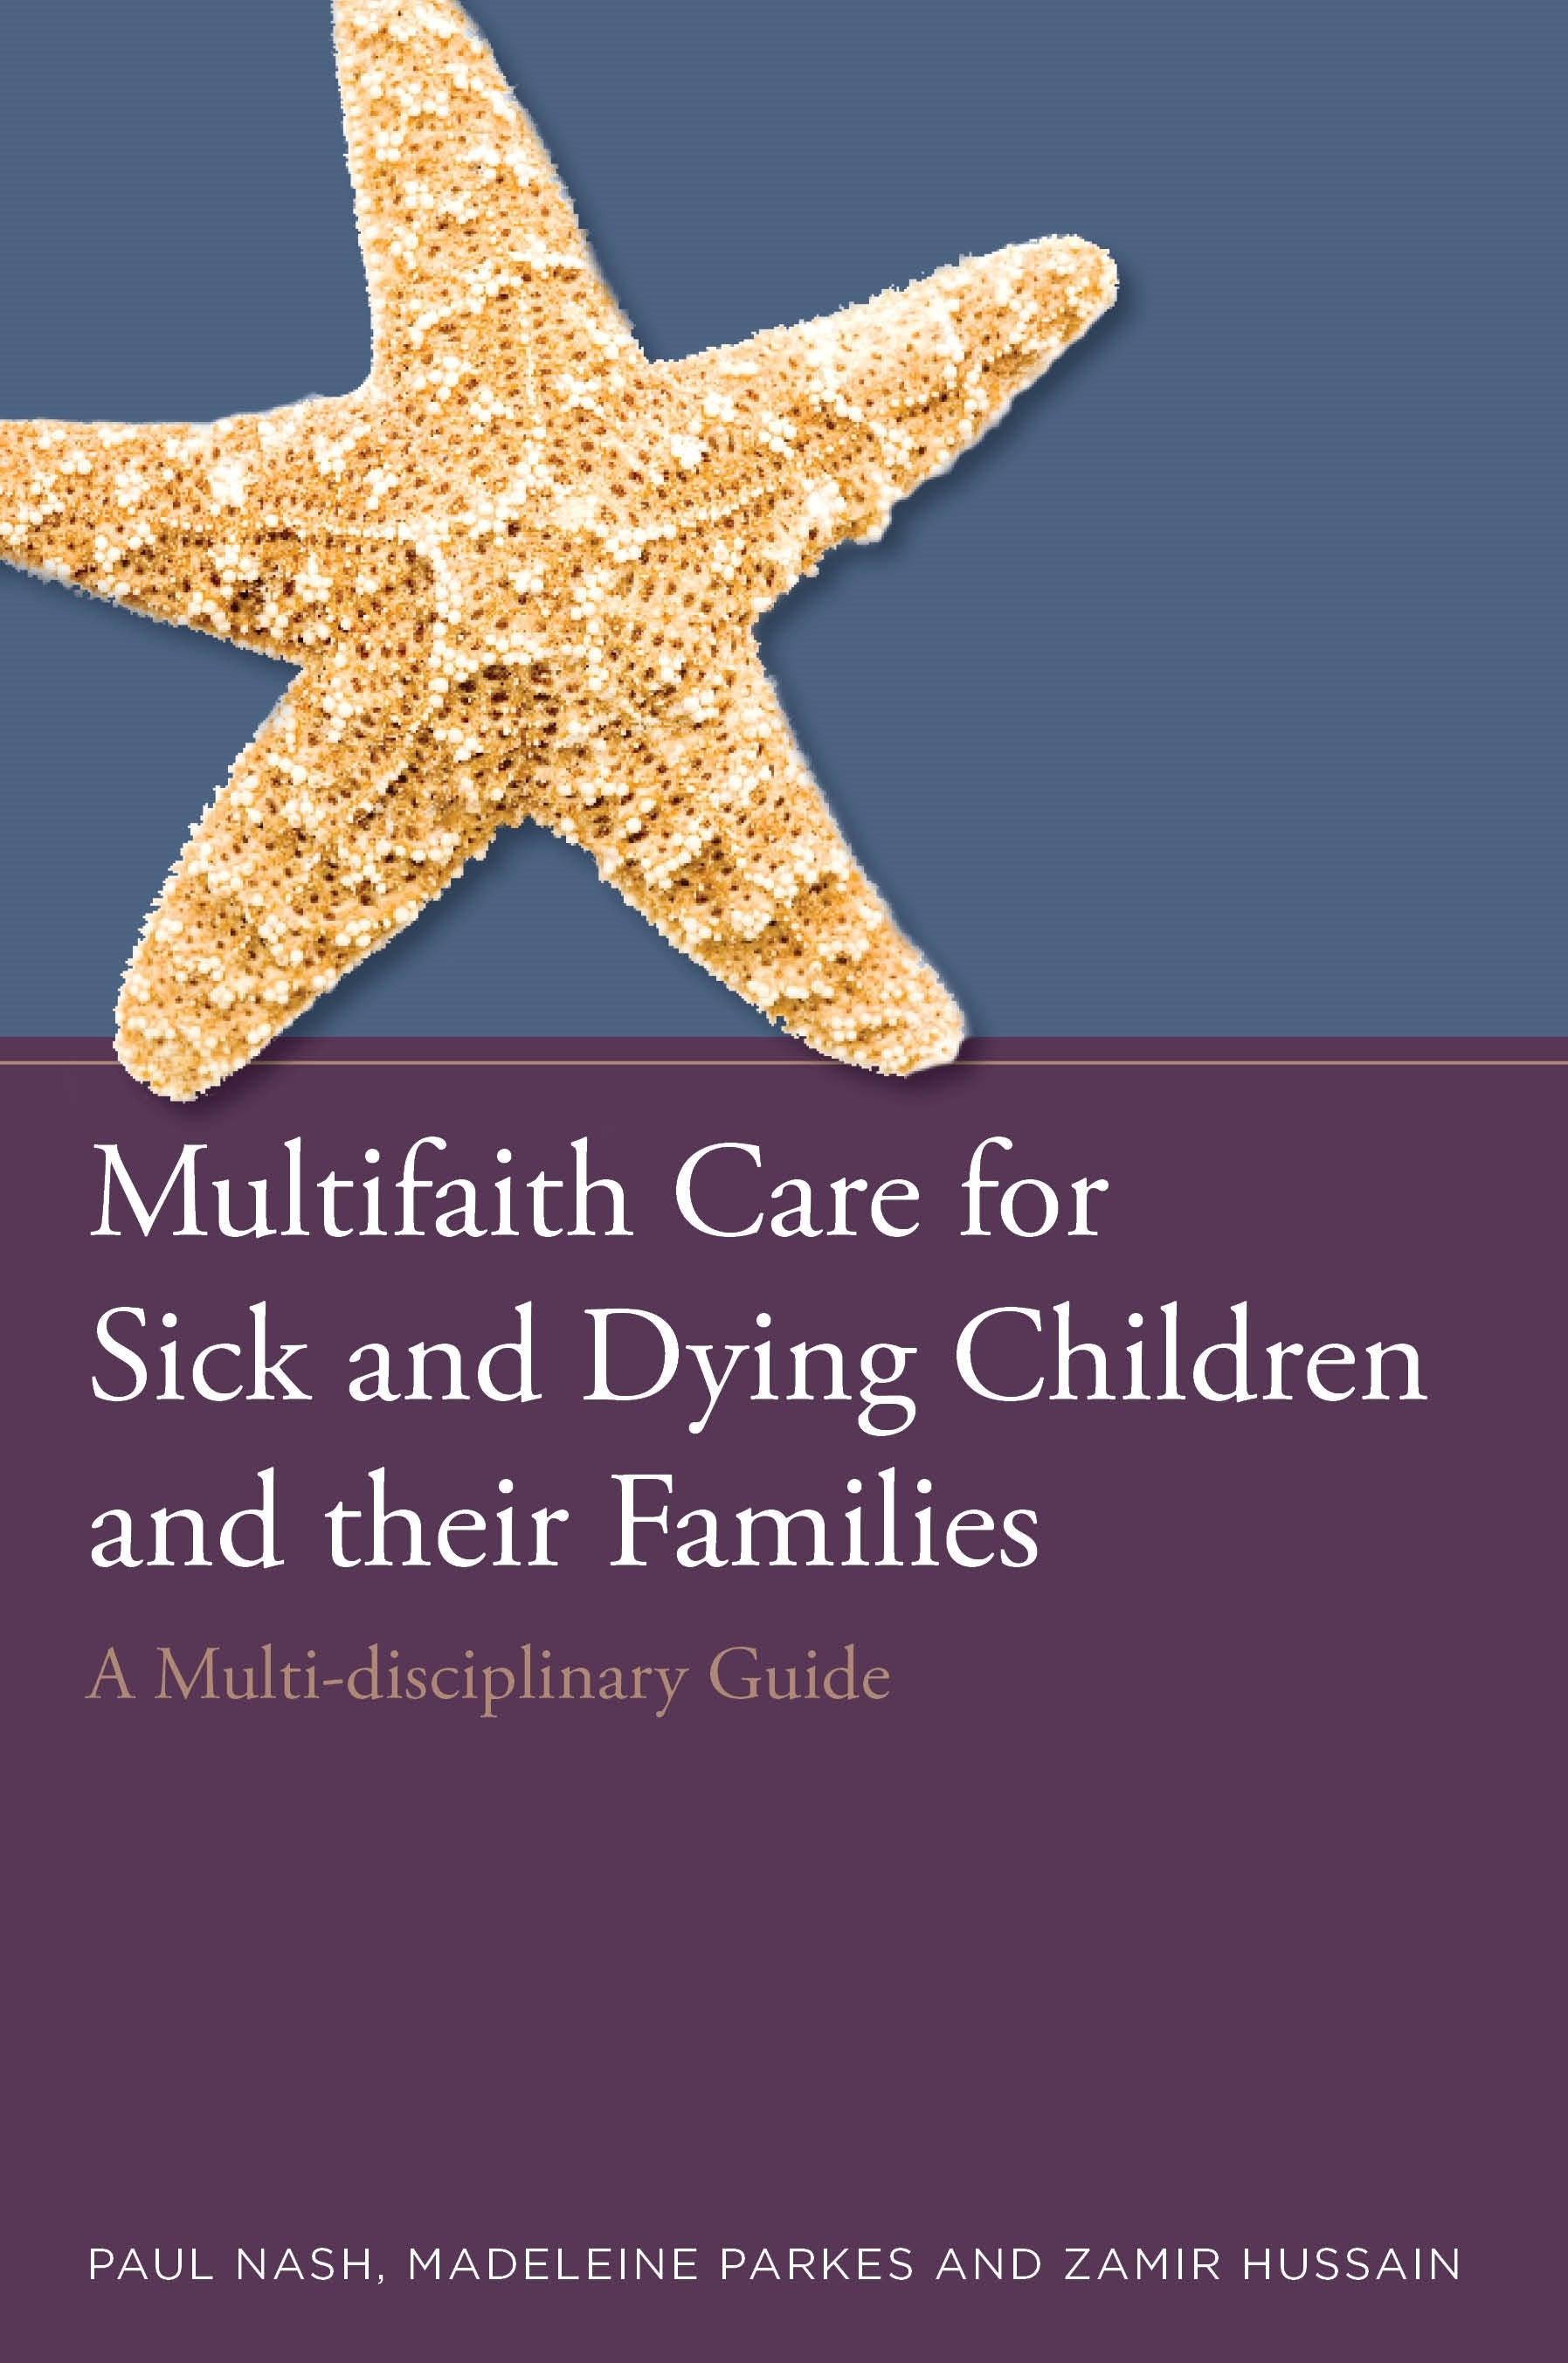 Multifaith Care for Sick and Dying Children and their Families by Paul Nash, Zamir Hussain, Madeleine Parkes